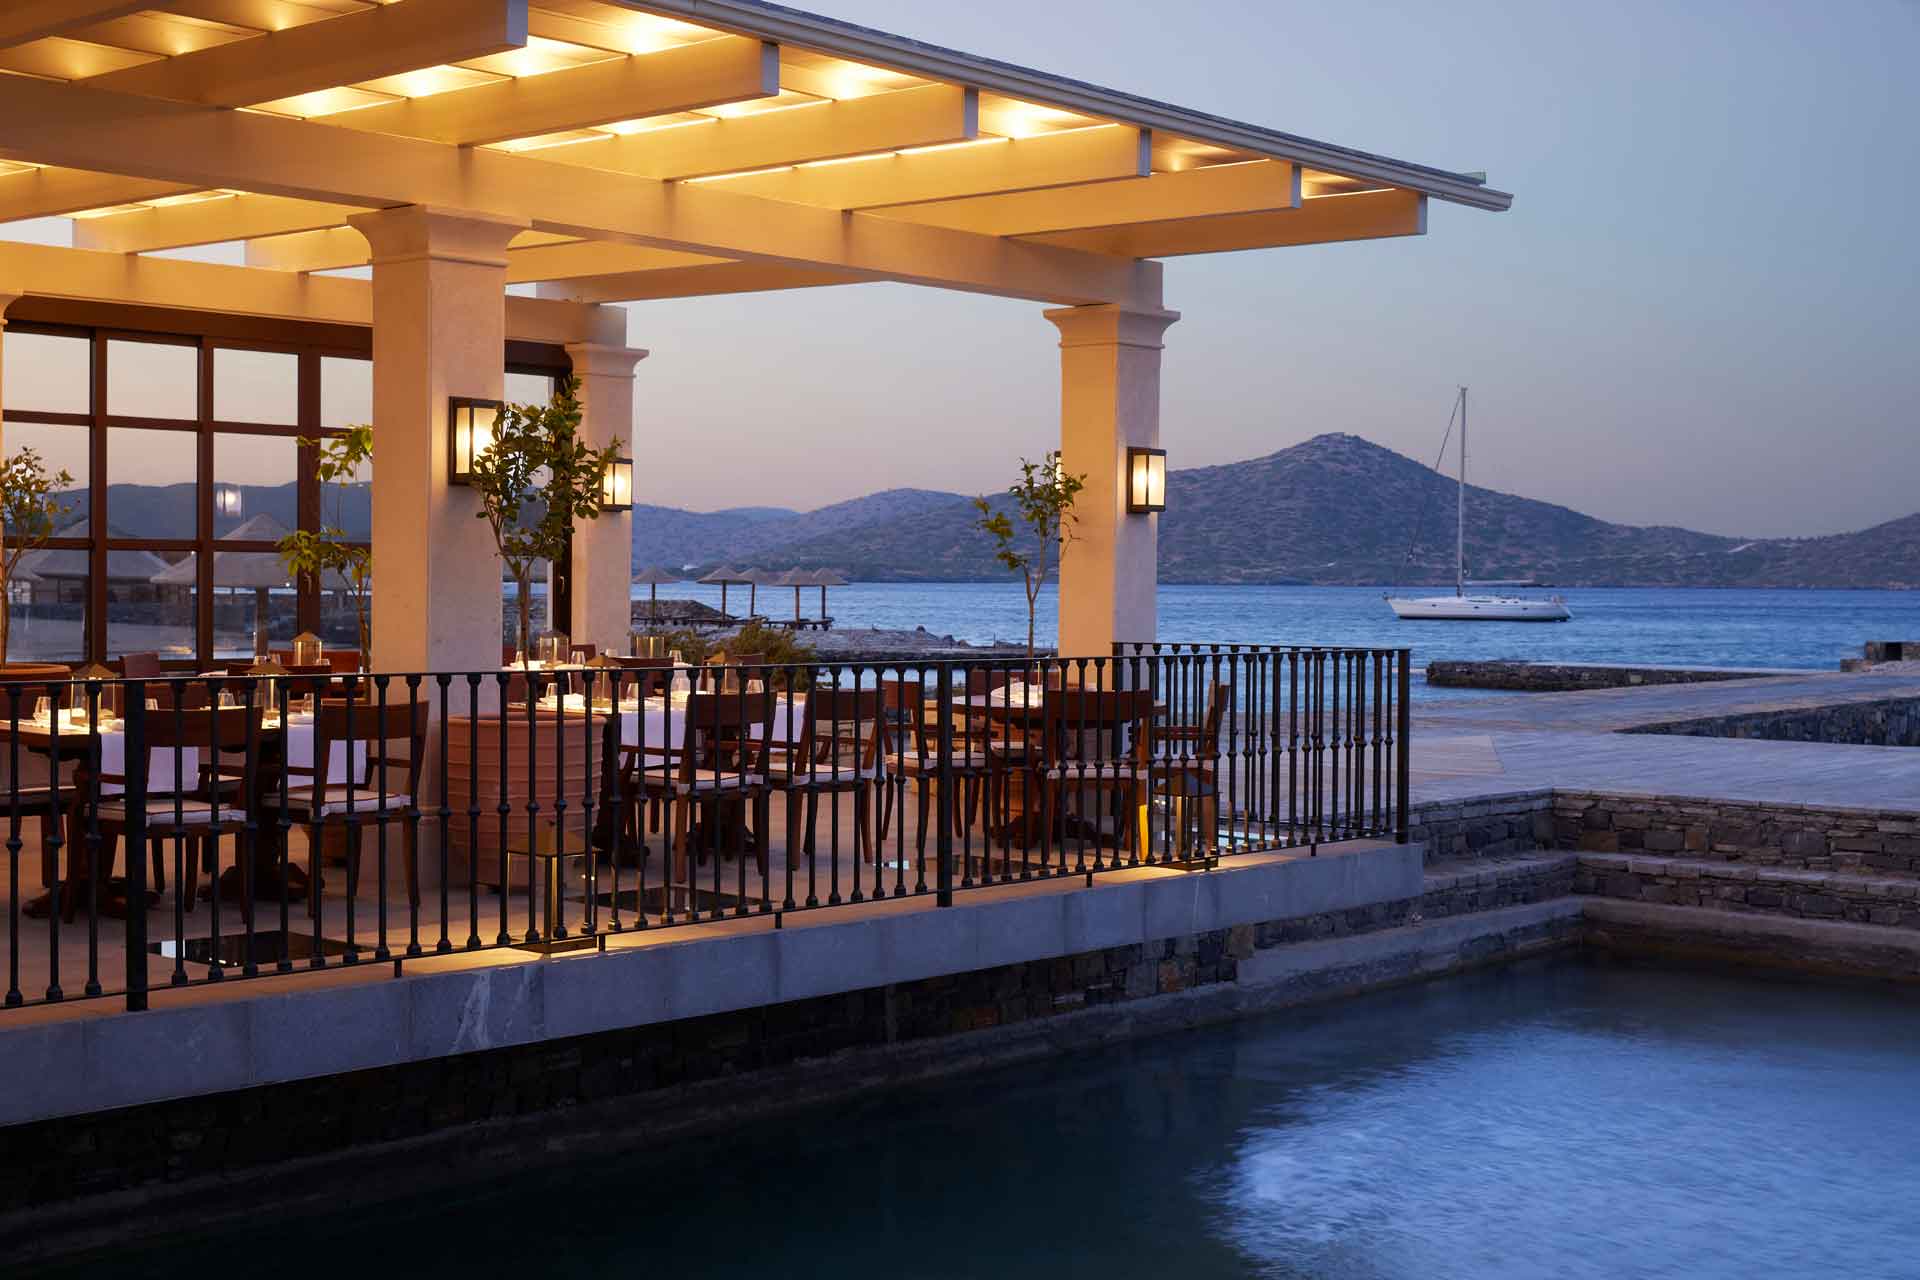 Waterfront restaurant at dusk, with mountains in the distance.